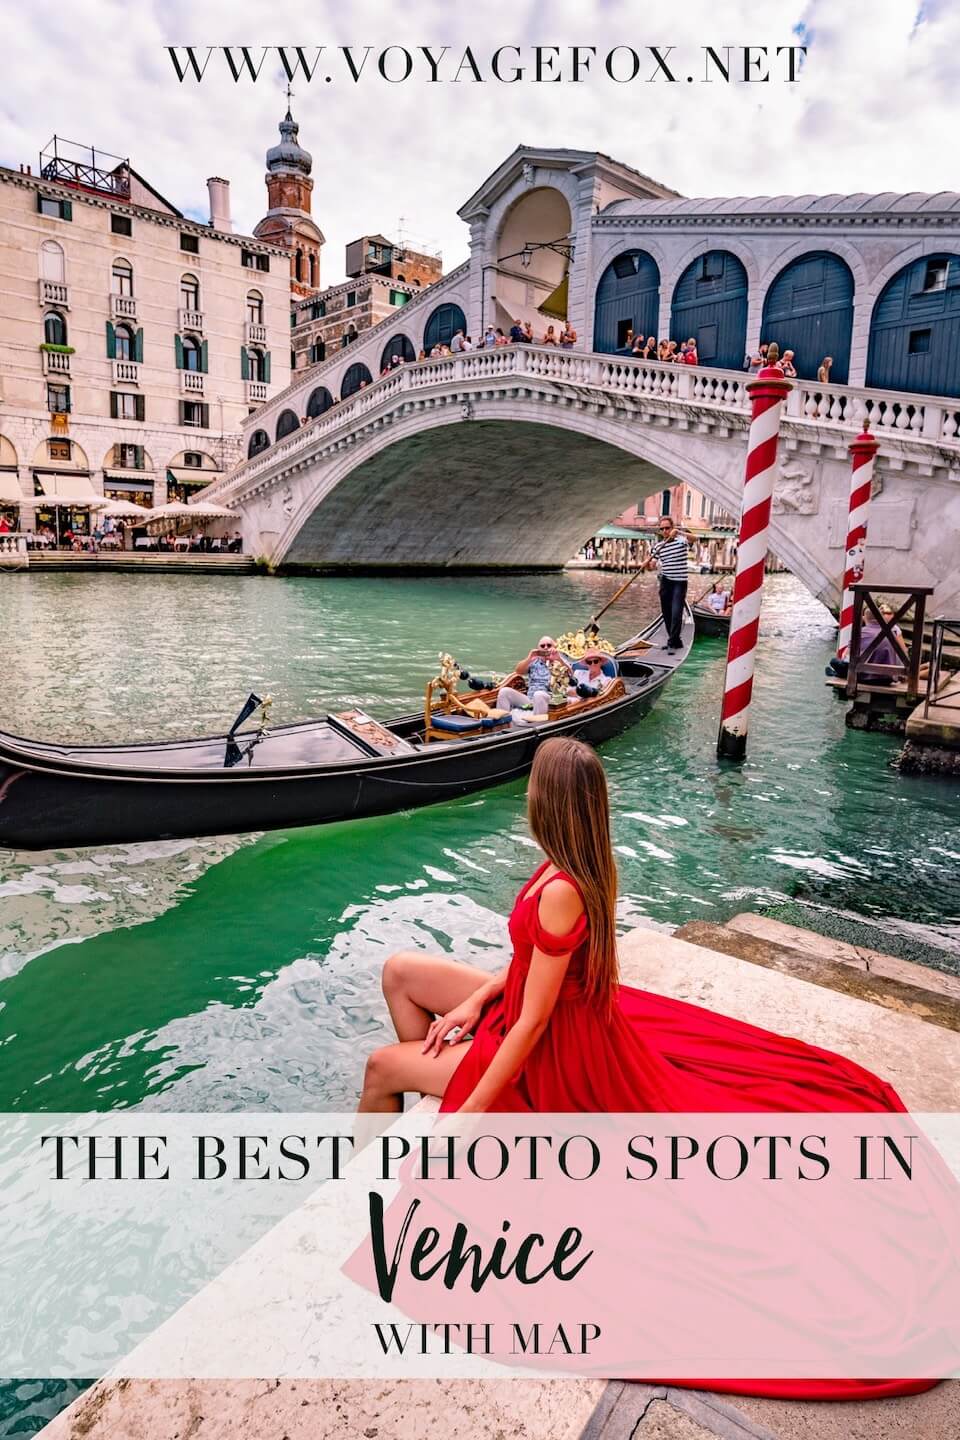 The best photo spots in Venice with map - voyagefox